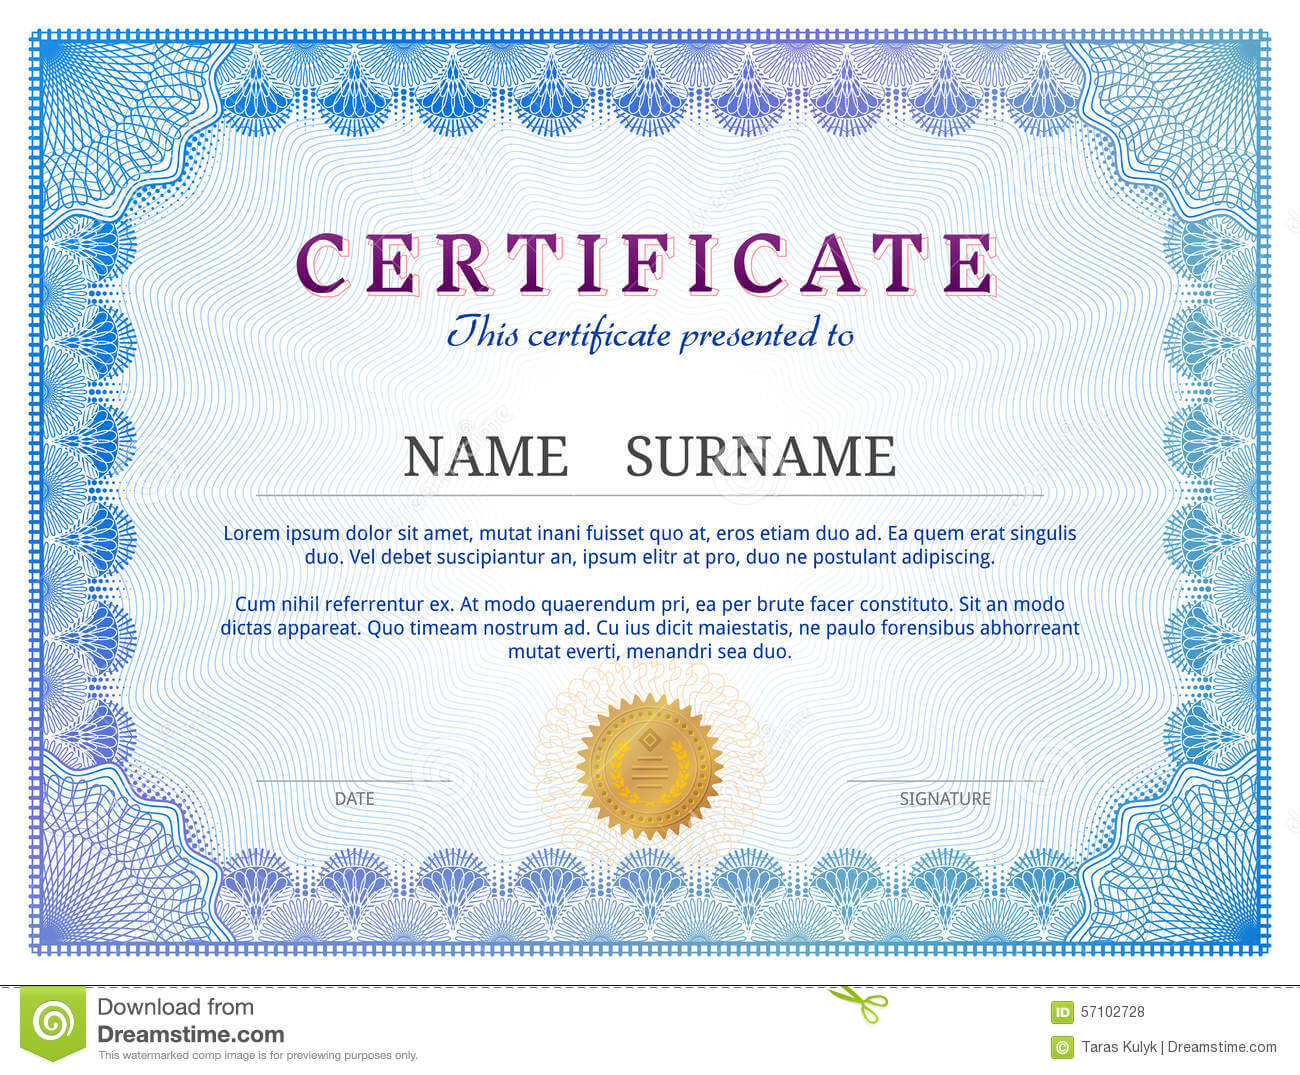 Certificate Template With Guilloche Elements Stock Vector For Validation Certificate Template